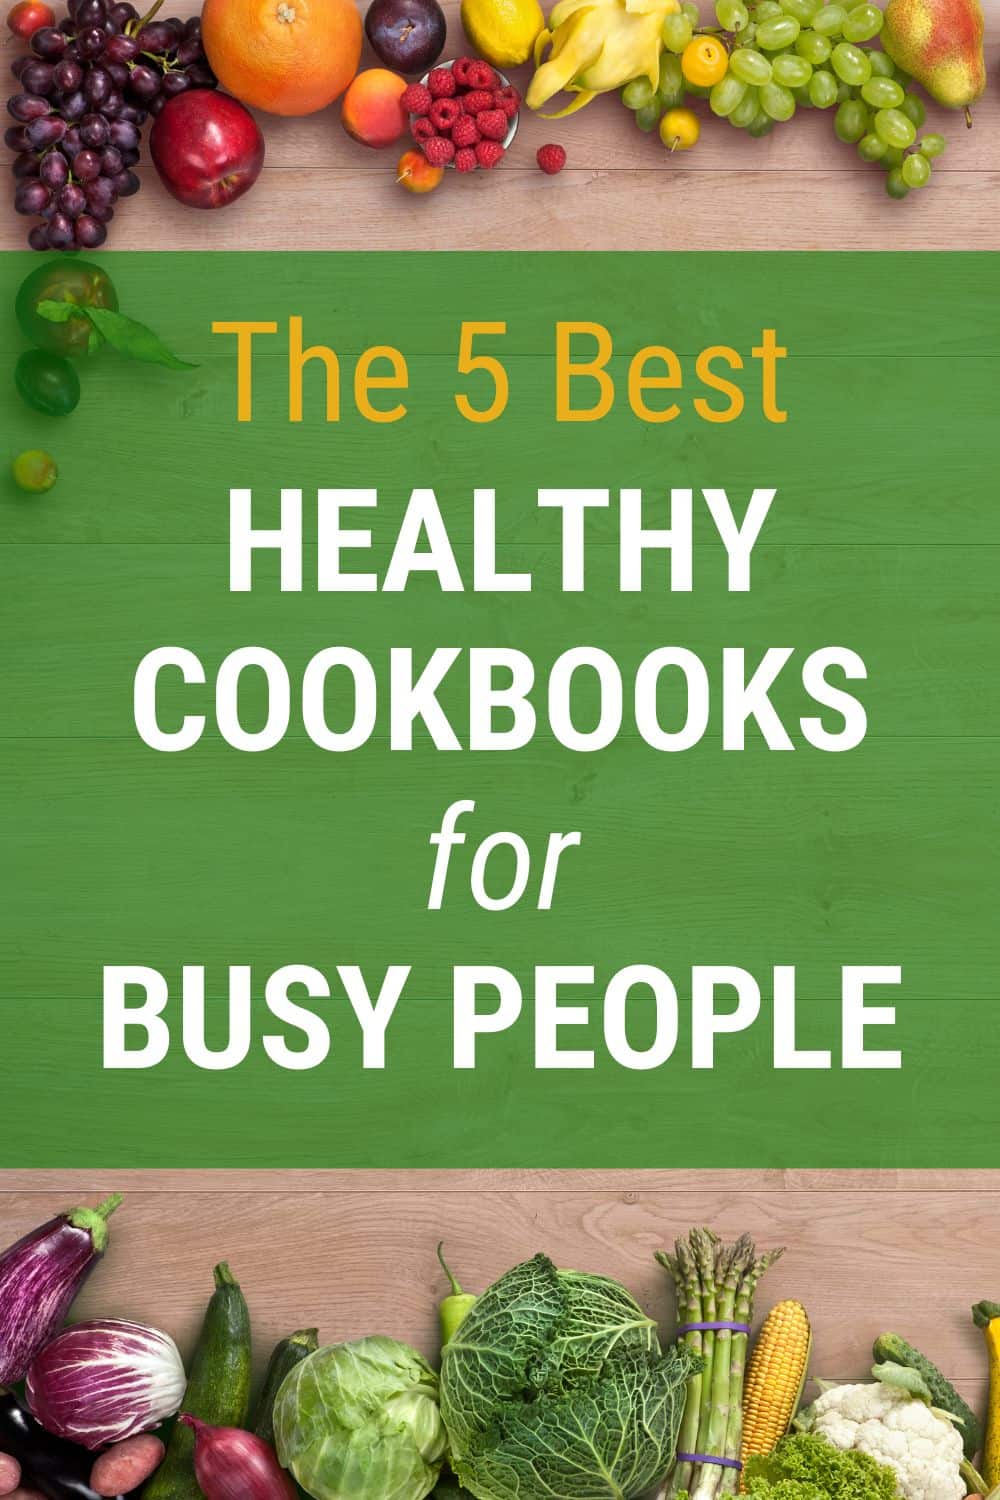 The 5 Best Healthy Cookbooks for Busy People